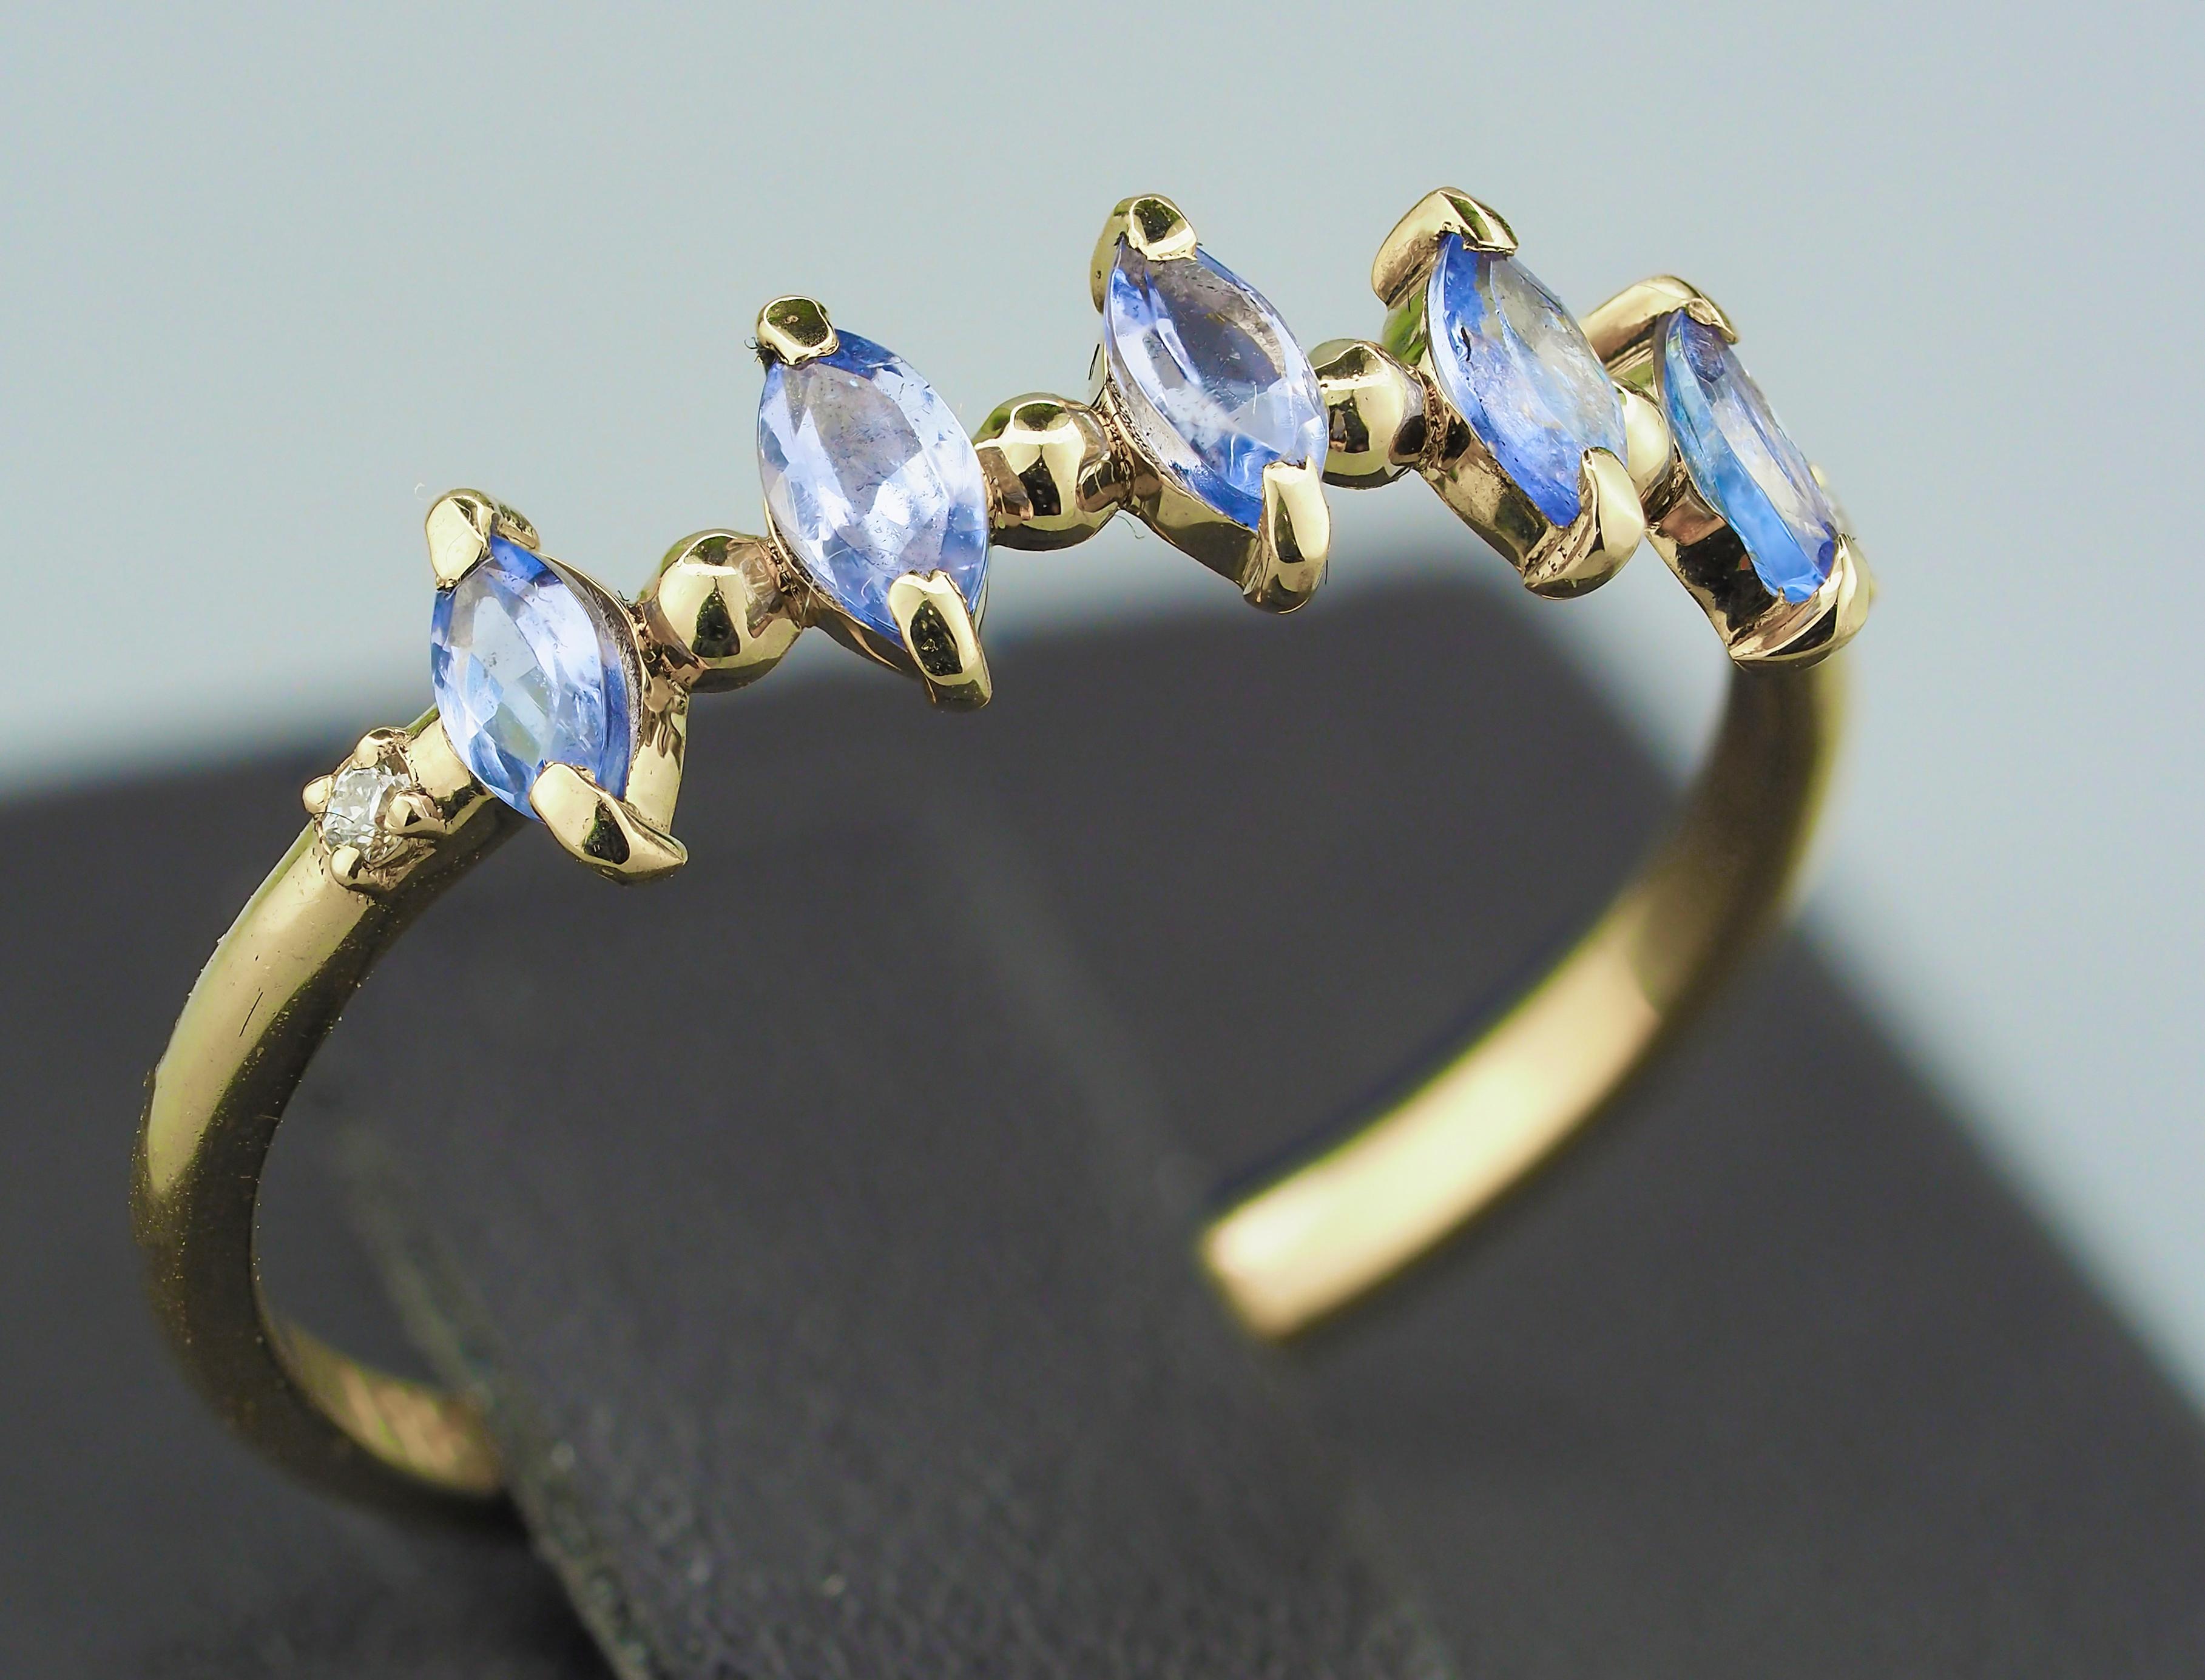 Half eternity tanzanite ring in 14k gold. 
Marquise tanzanites ring. Delicate tanzanite ring. Semi eternity tanzanite ring.

Metal: 14k gold
Weight: 1.3 g. depends from size.

Set with tanzanites
Marquise shape, light violetish blue color, aprx 1 ct